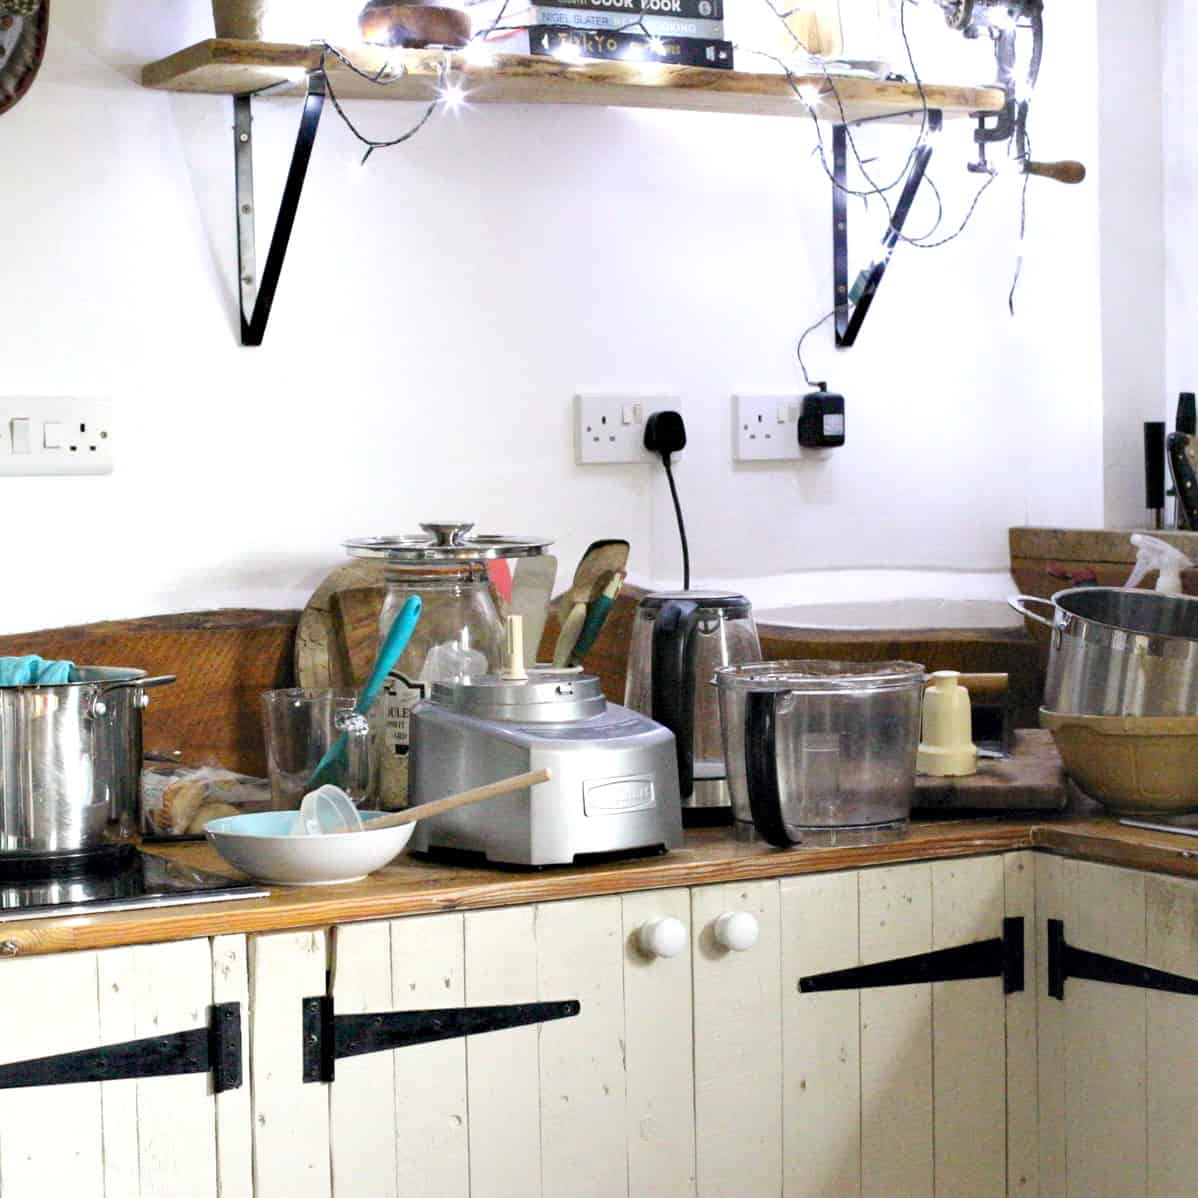 Behind the scenes photo of a very messy kitchen after making a Mrs Beeton’s recipe for rose hip syrup!